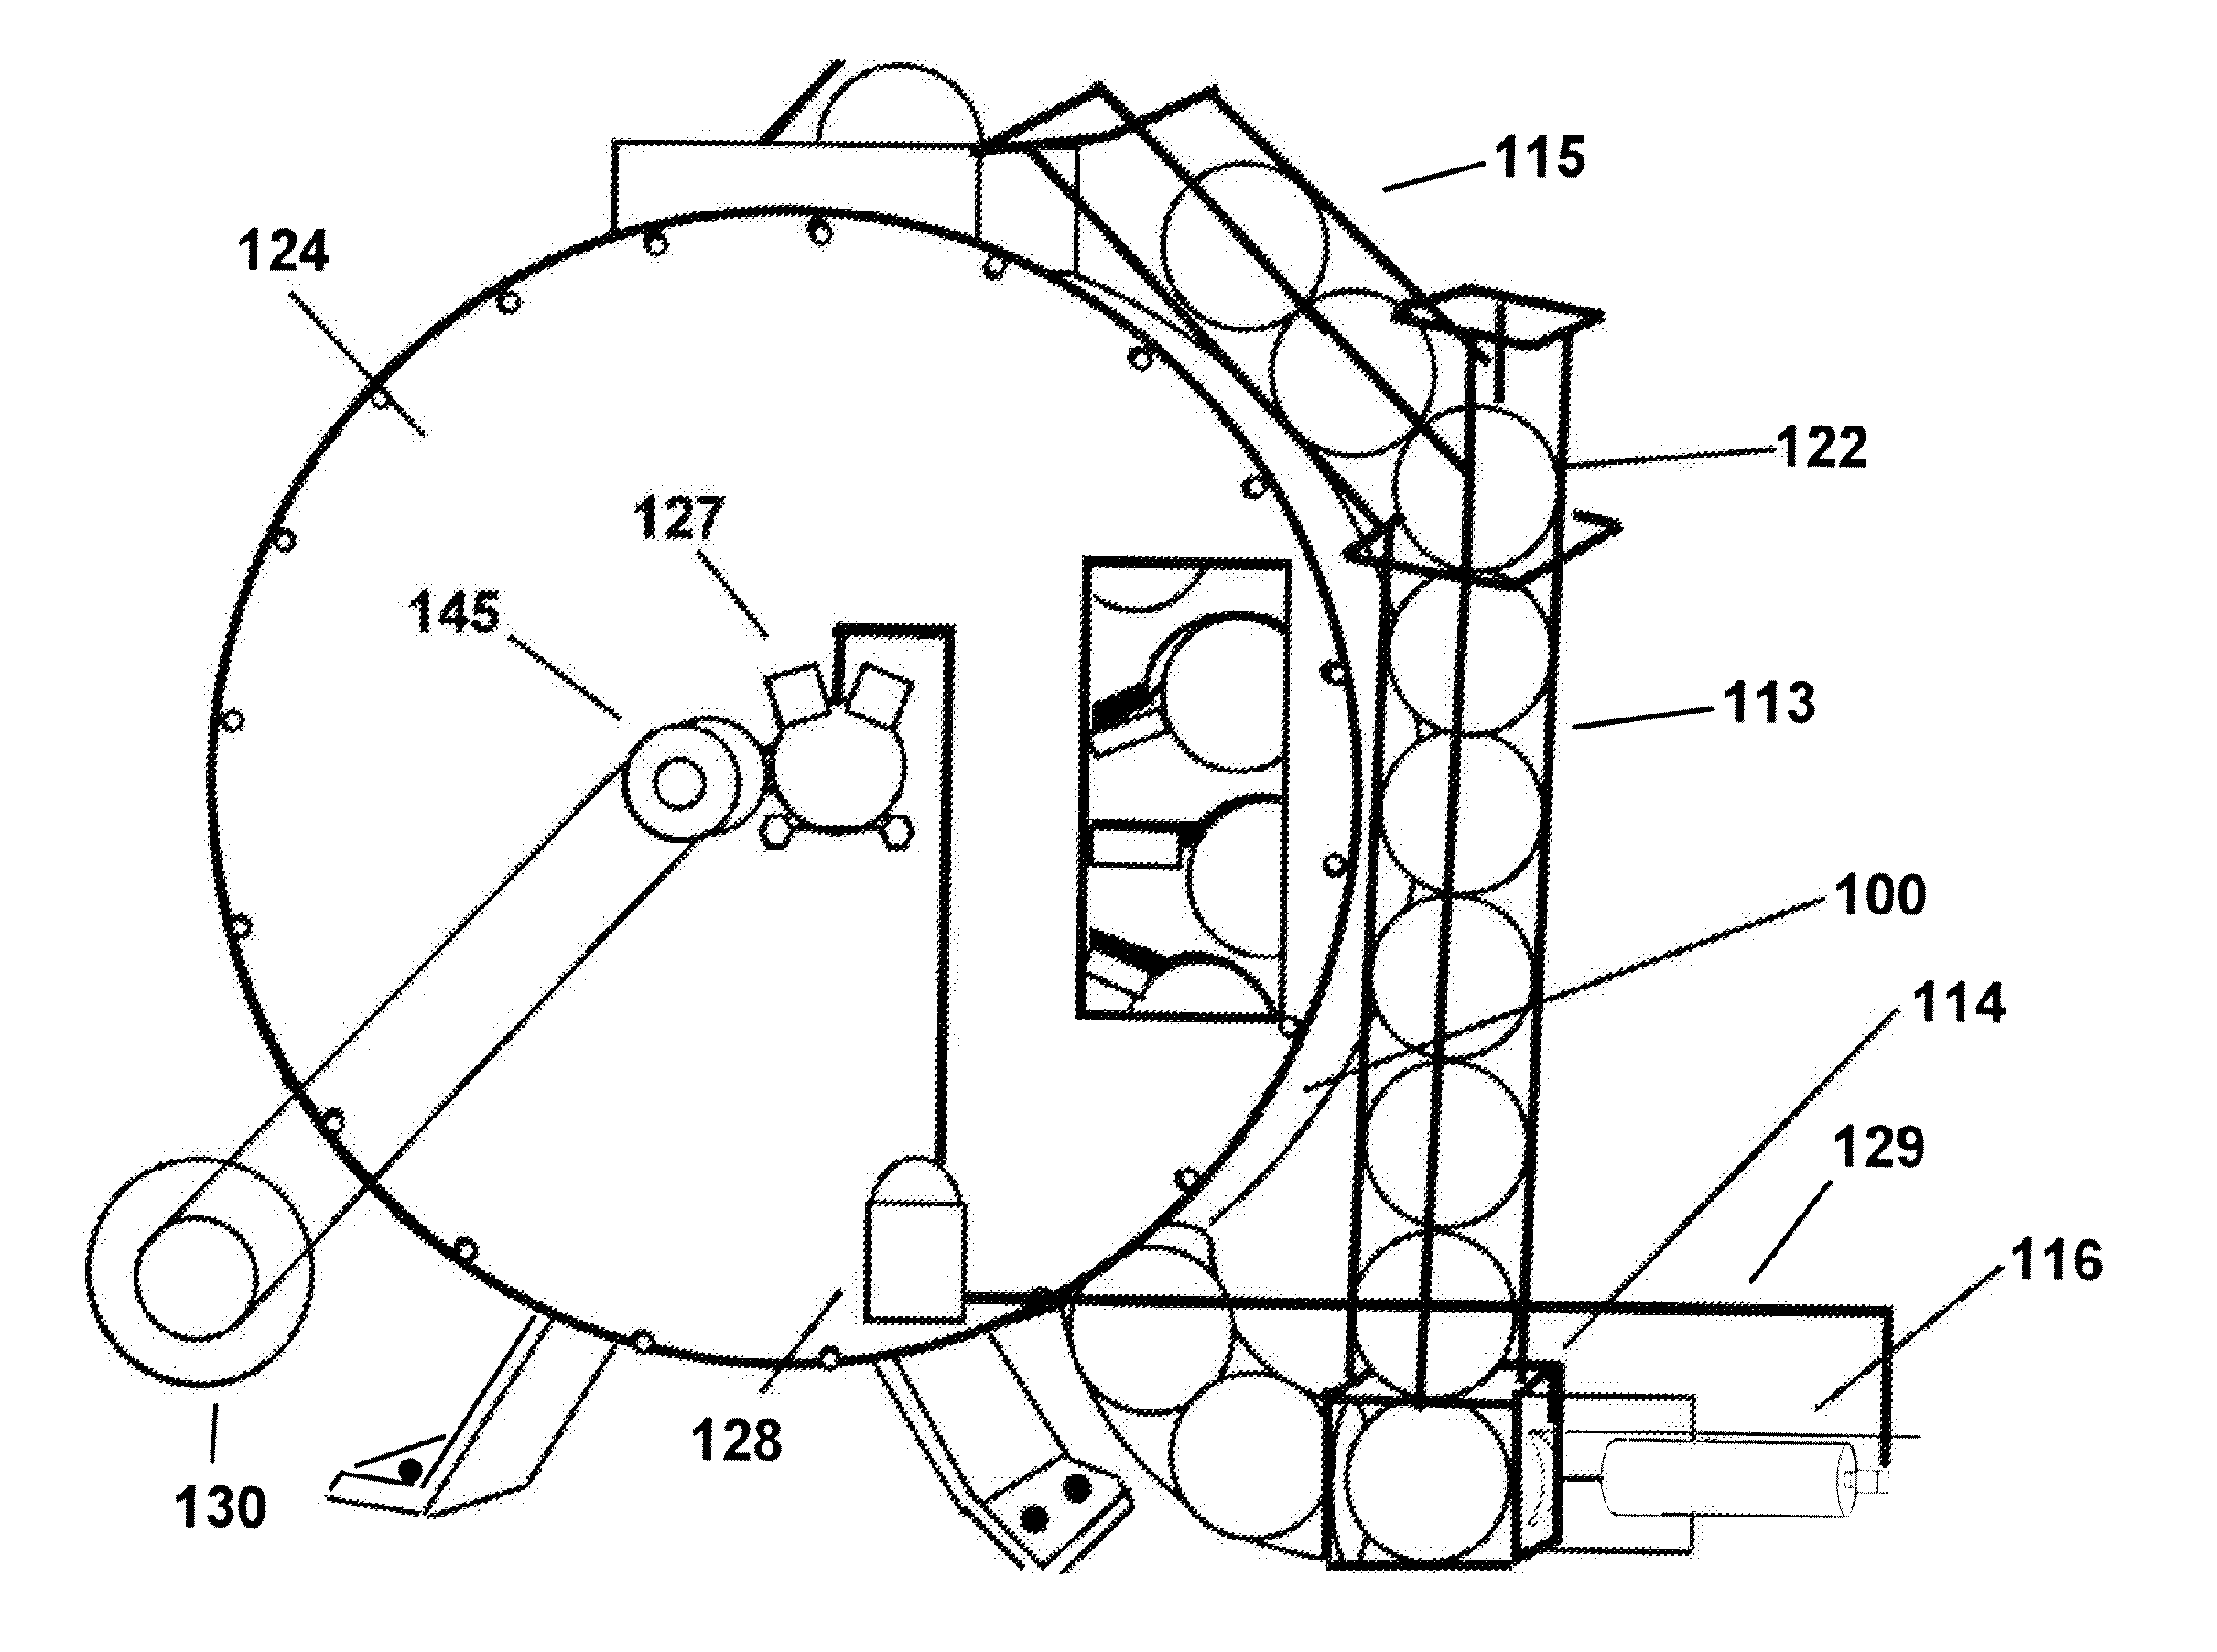 Hydroelectric device for harnessing the buoyant force of an object in a fluid